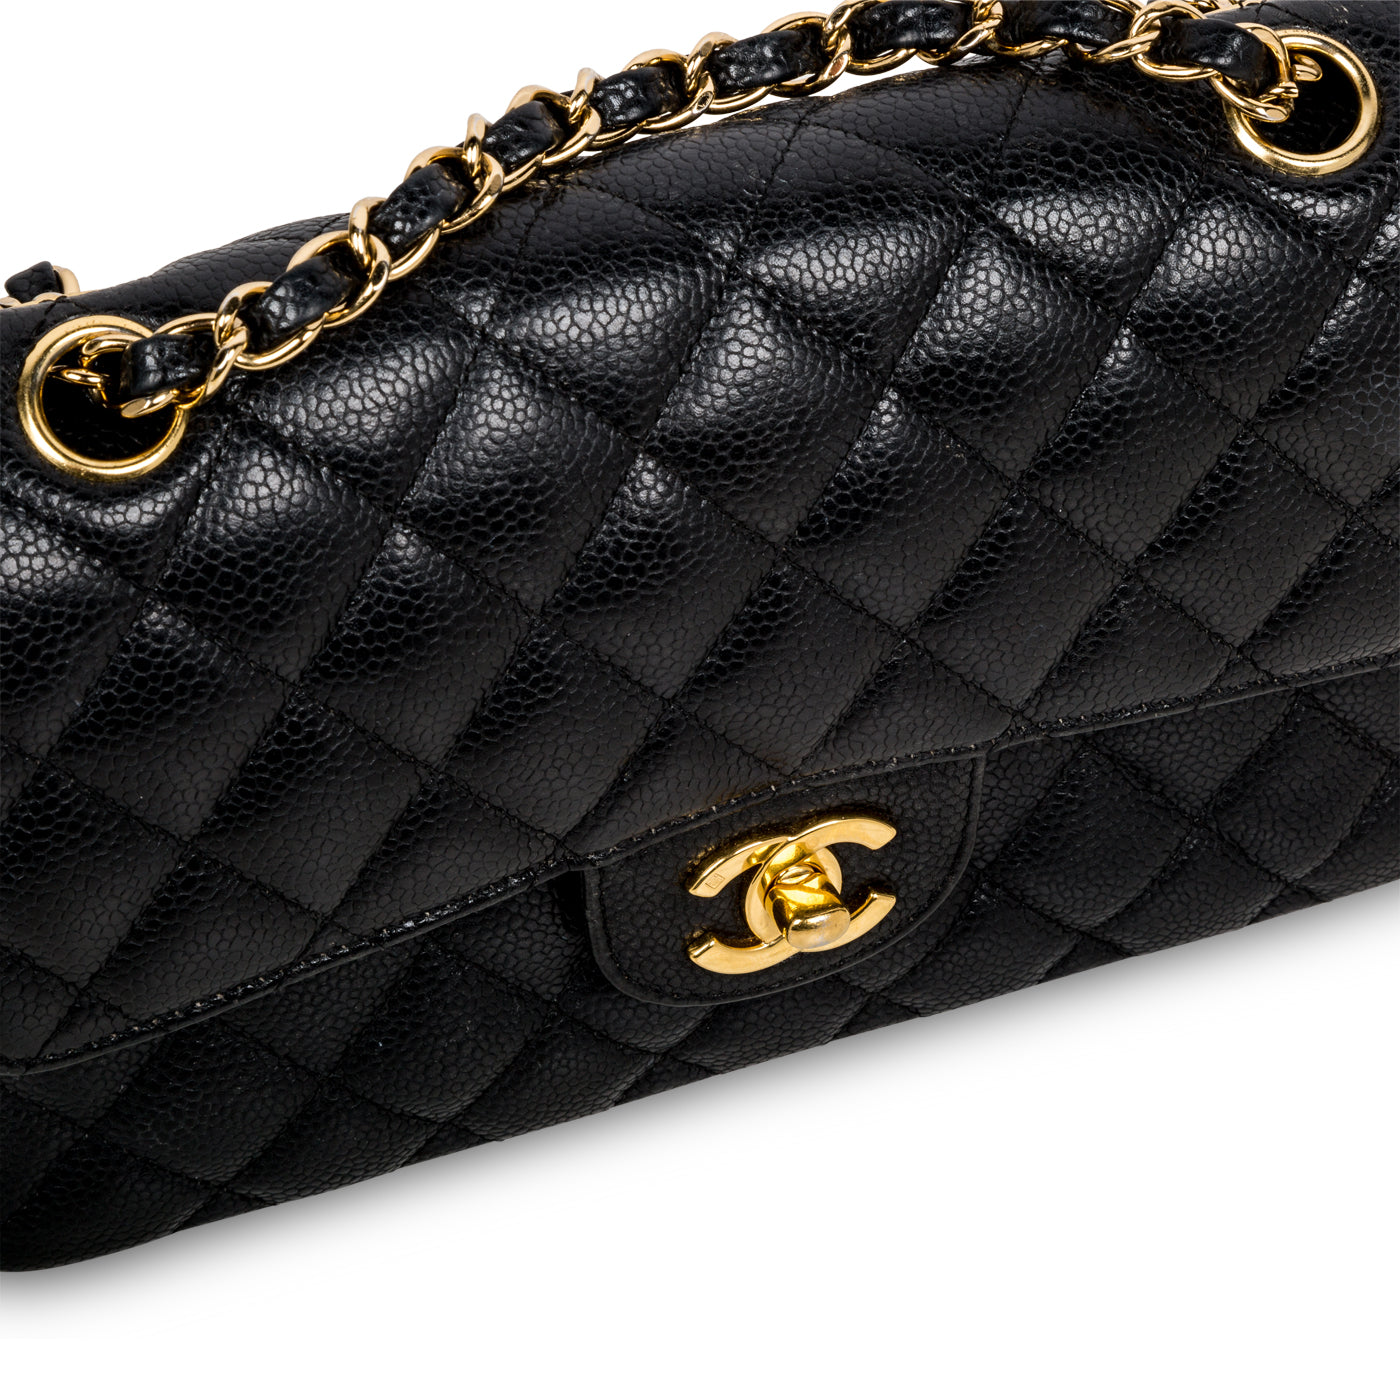 The Ultimate Bag Guide The Chanel Classic Flap Bag  PurseBlog